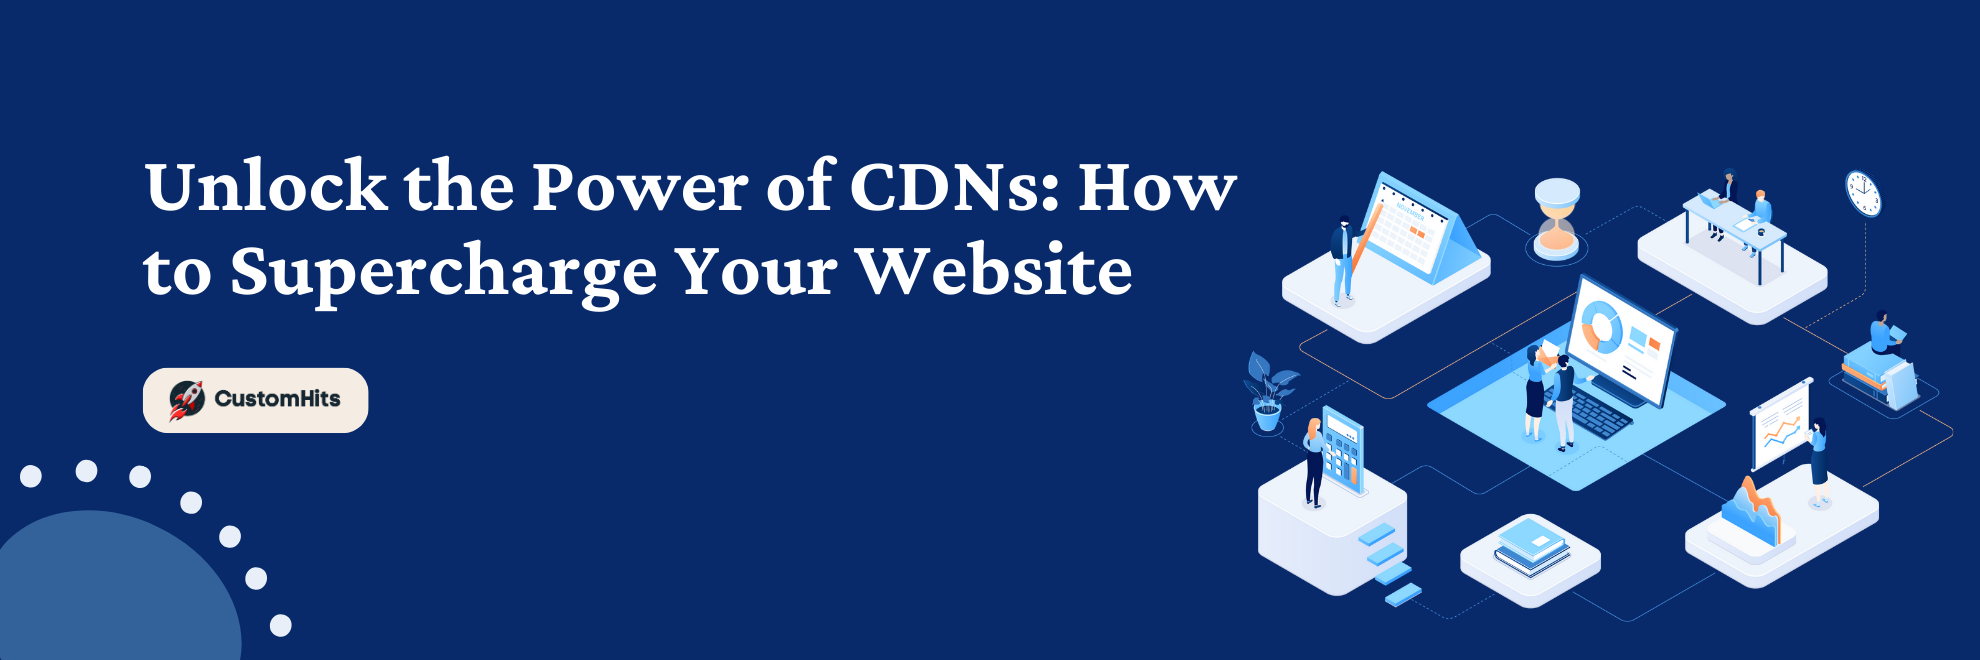 Unlock the Power of CDNs: How to Supercharge Your Website's Speed